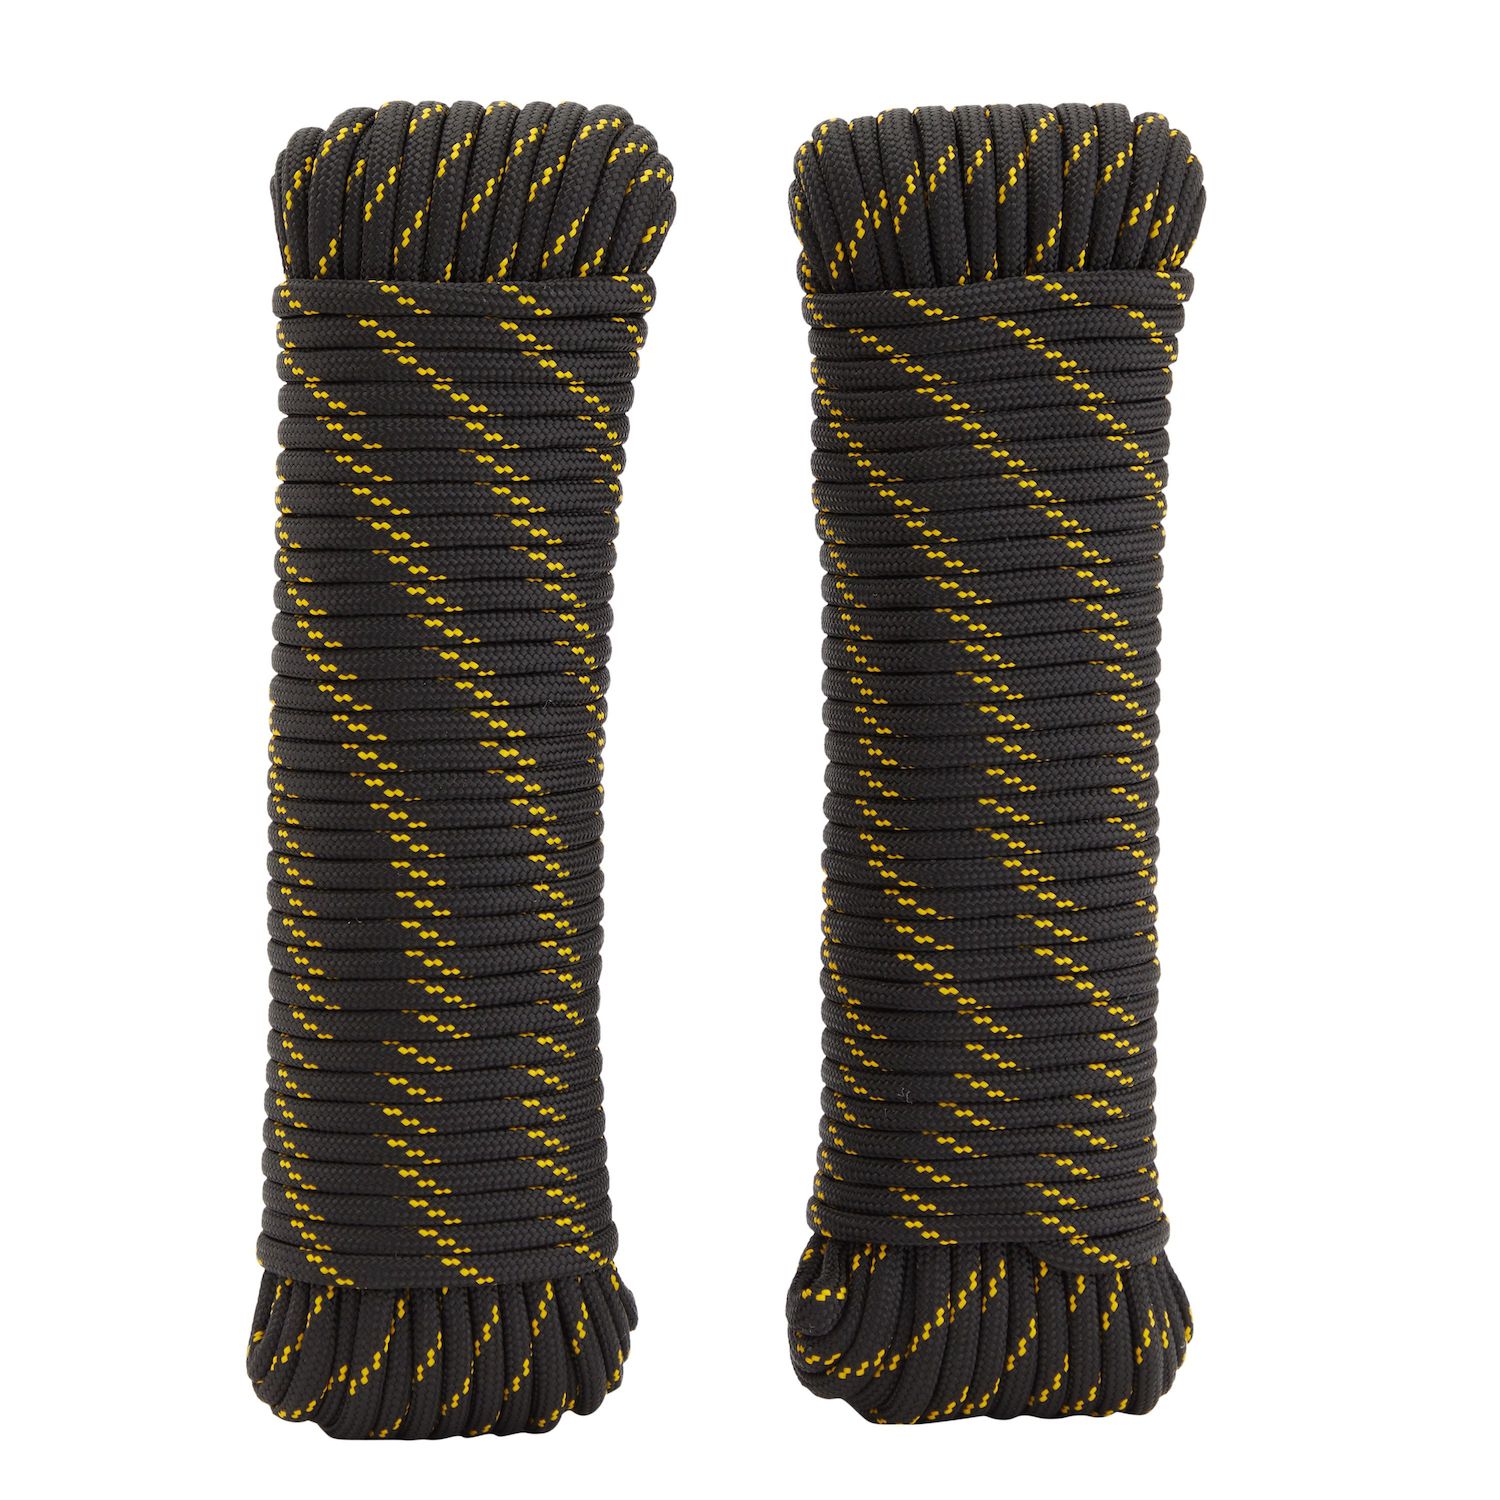 3/8 Inch x 100 Ft Braided Polyester Rope for Knot Tying Practice